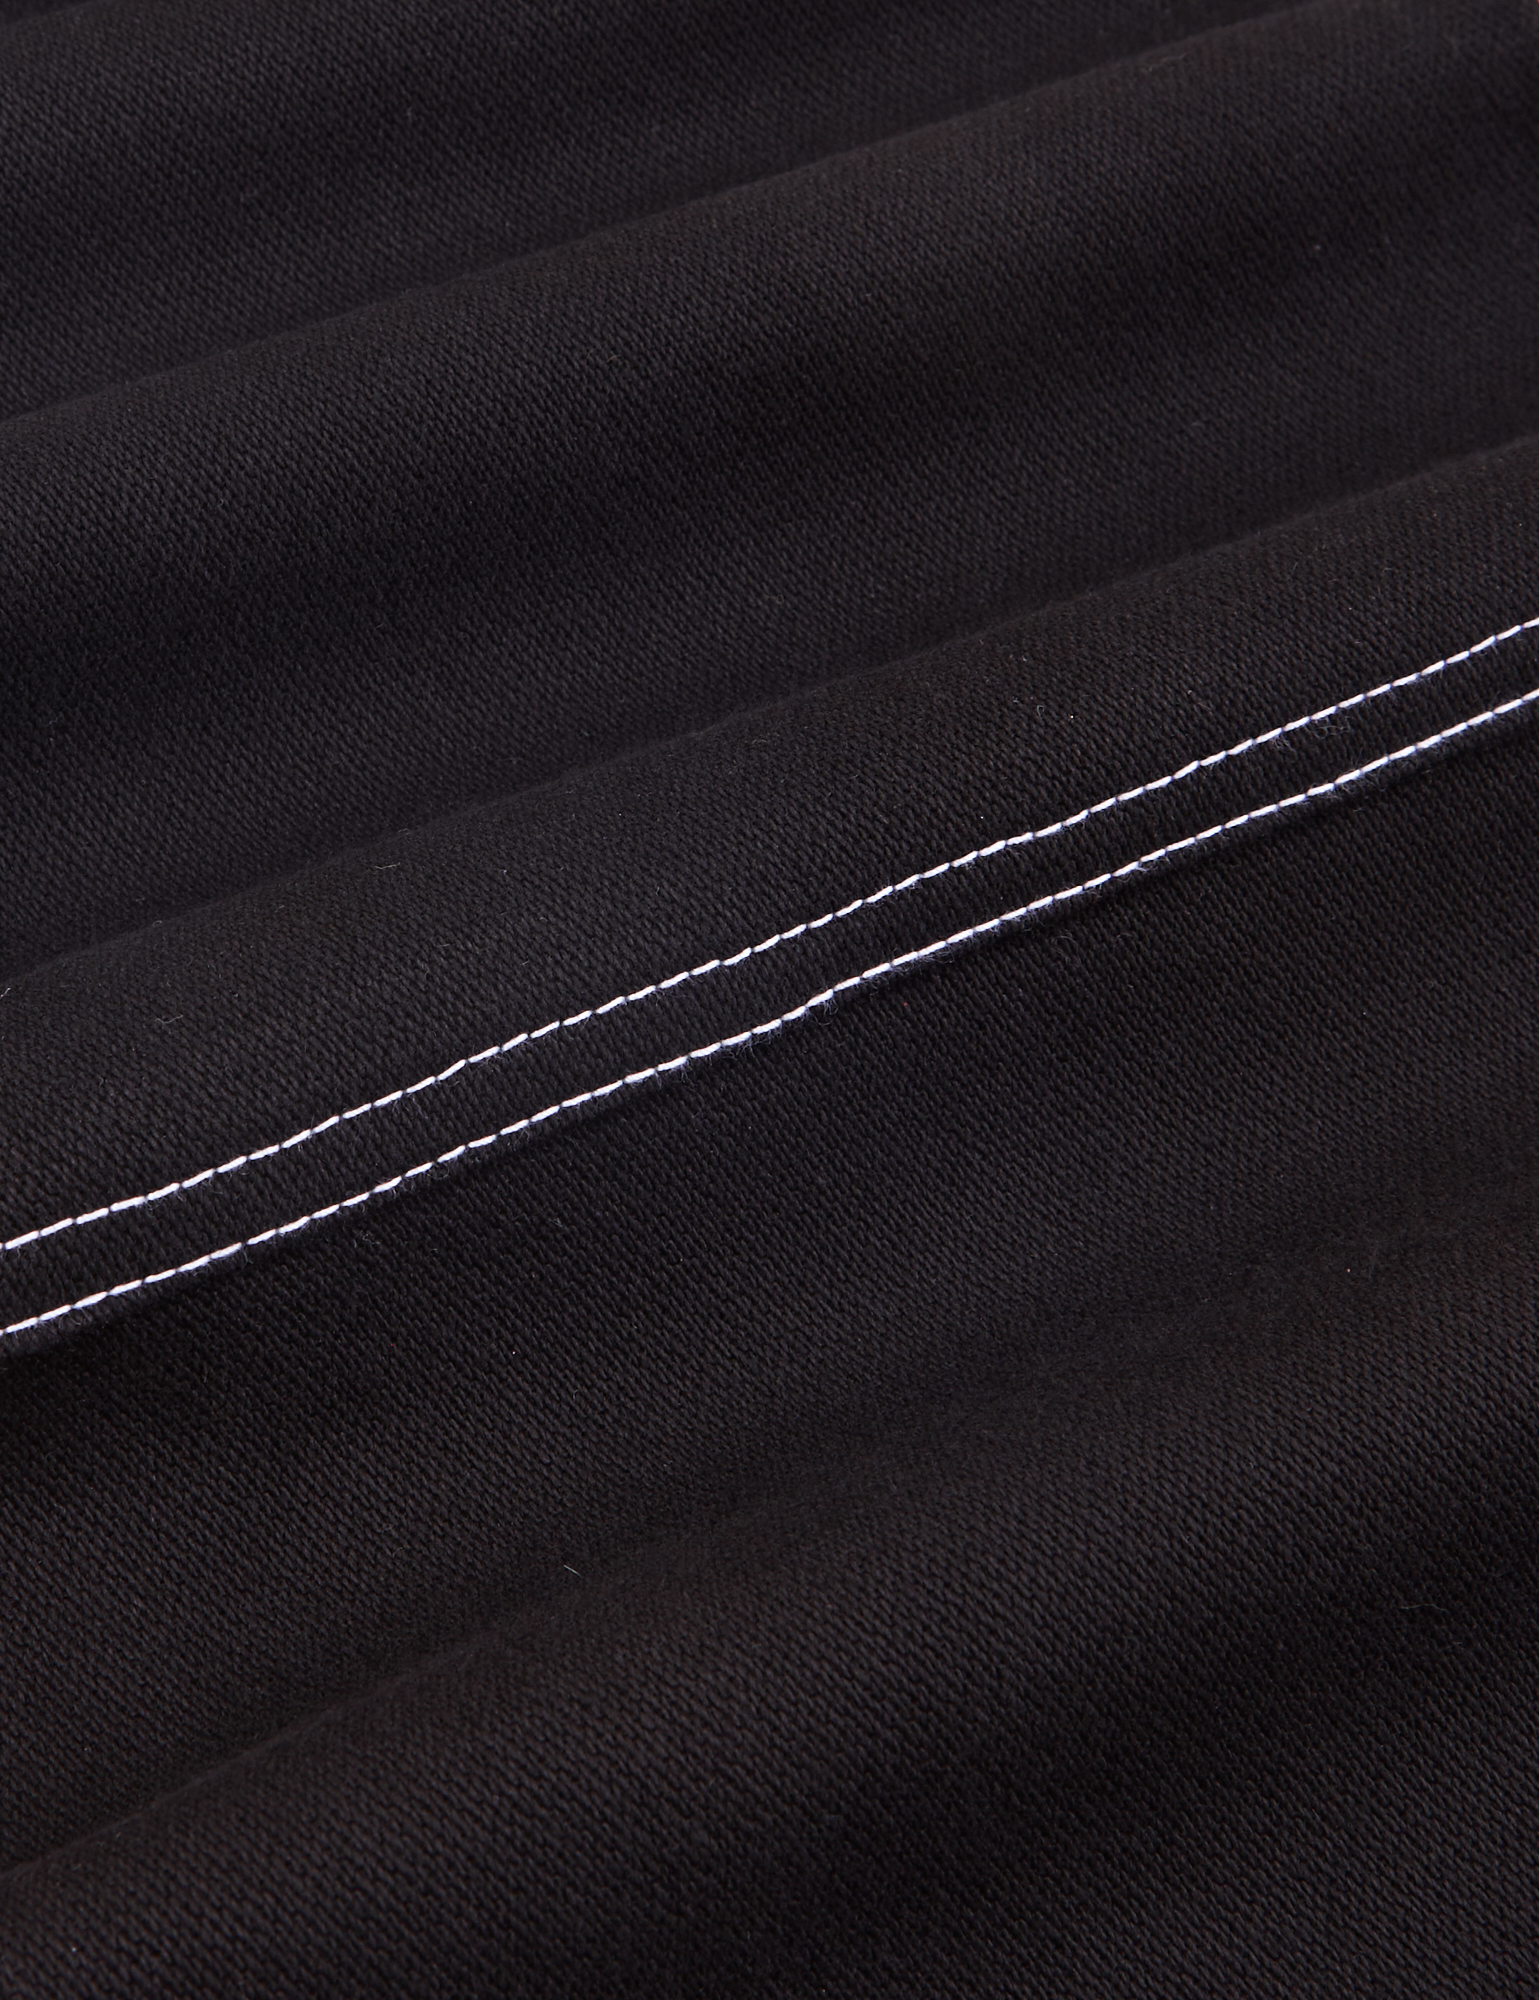 Carpenter Jeans in Black fabric detail close up. White stitching on pants.